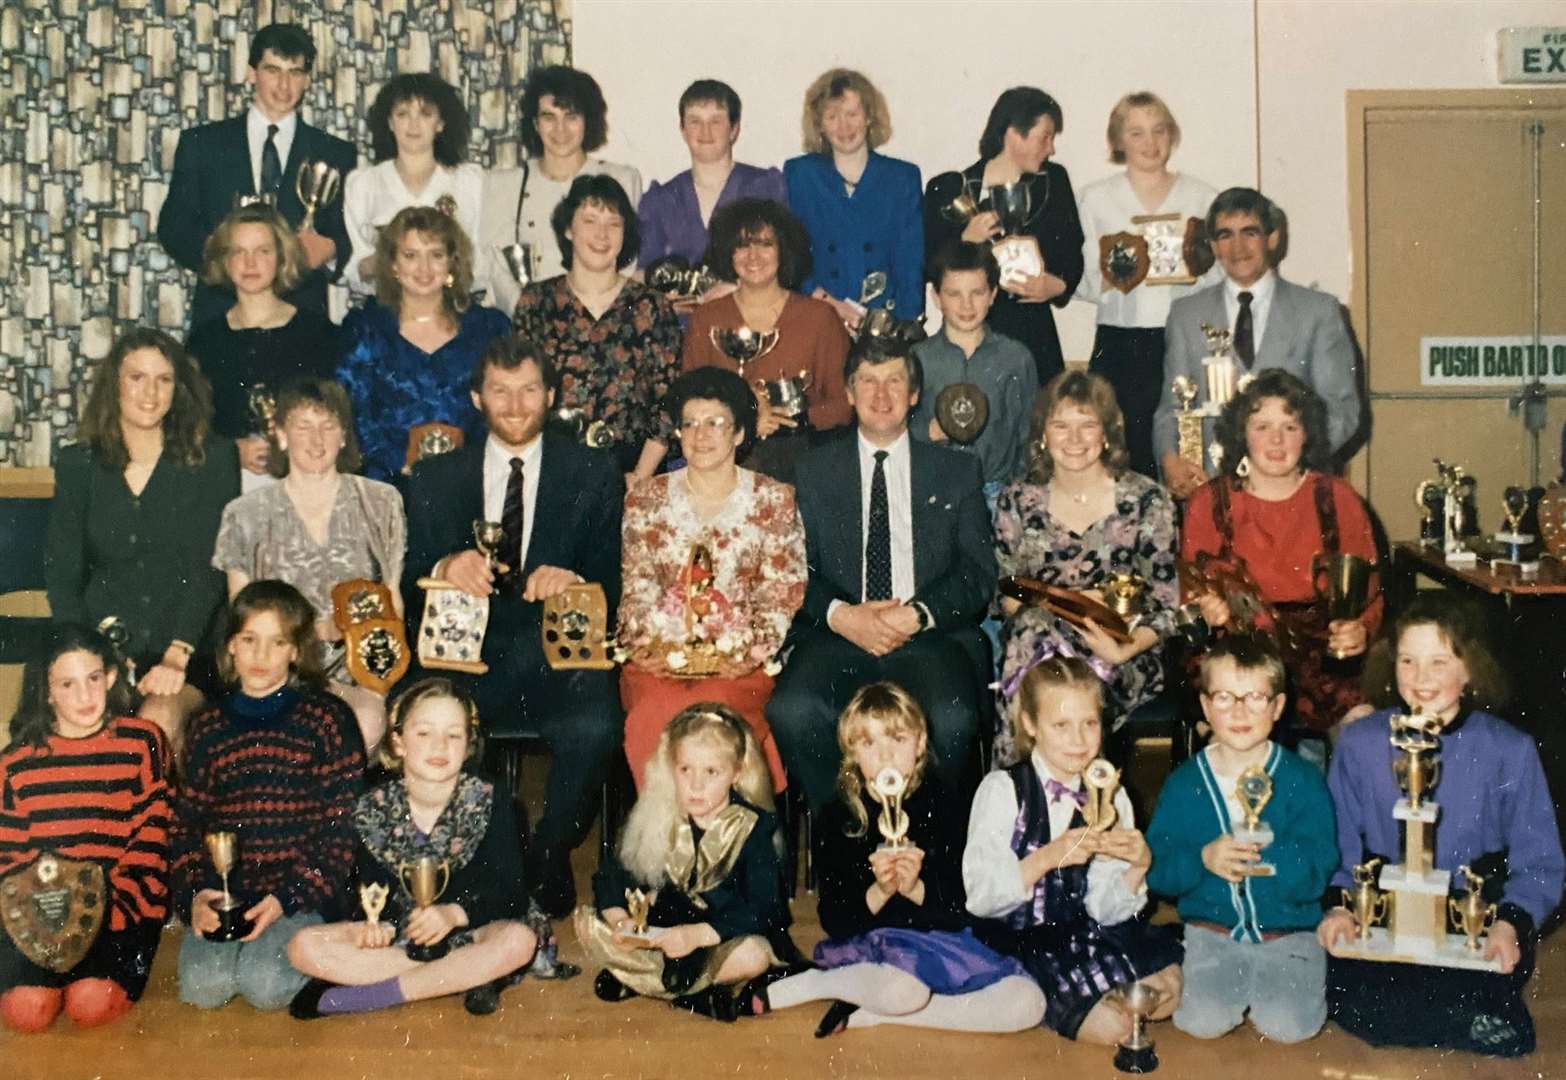 Prize-winners after the presentation of trophies at a Caithness Riding Club dance in 1992.